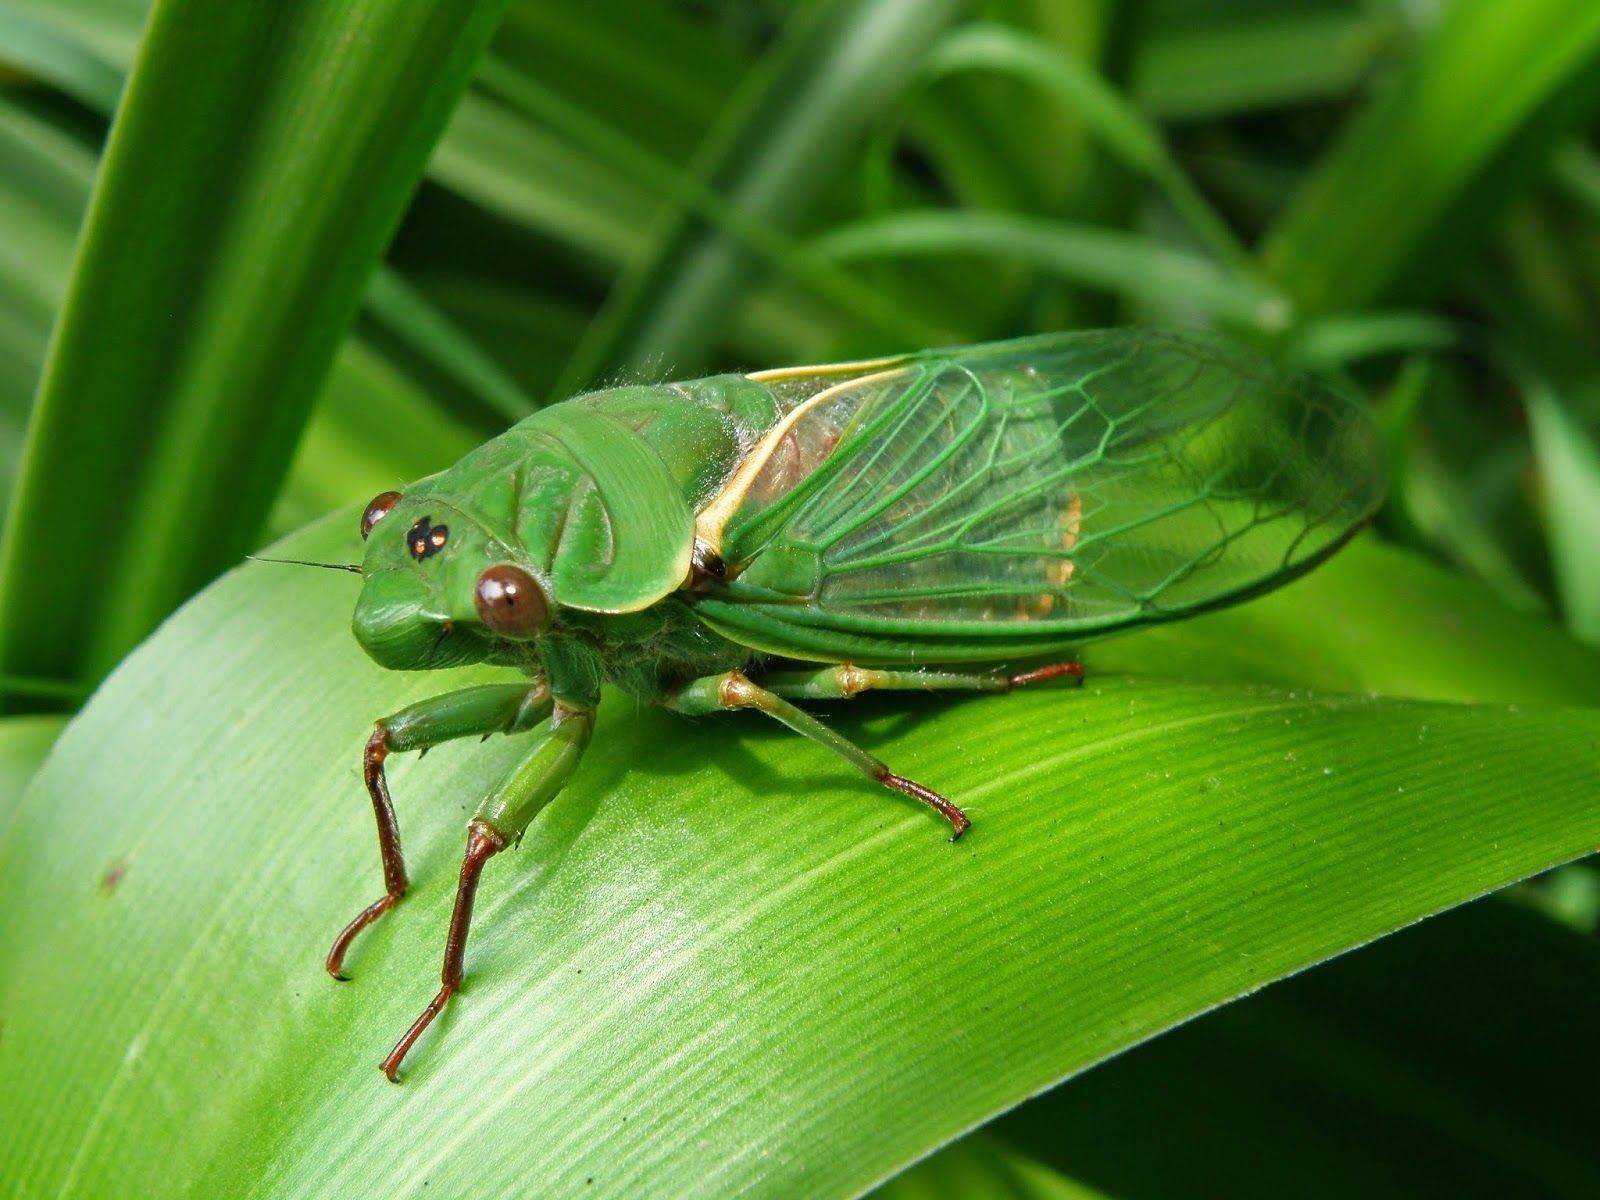 Green Grocer Cicada | Interesting Insects and spiders! | Pinterest ...